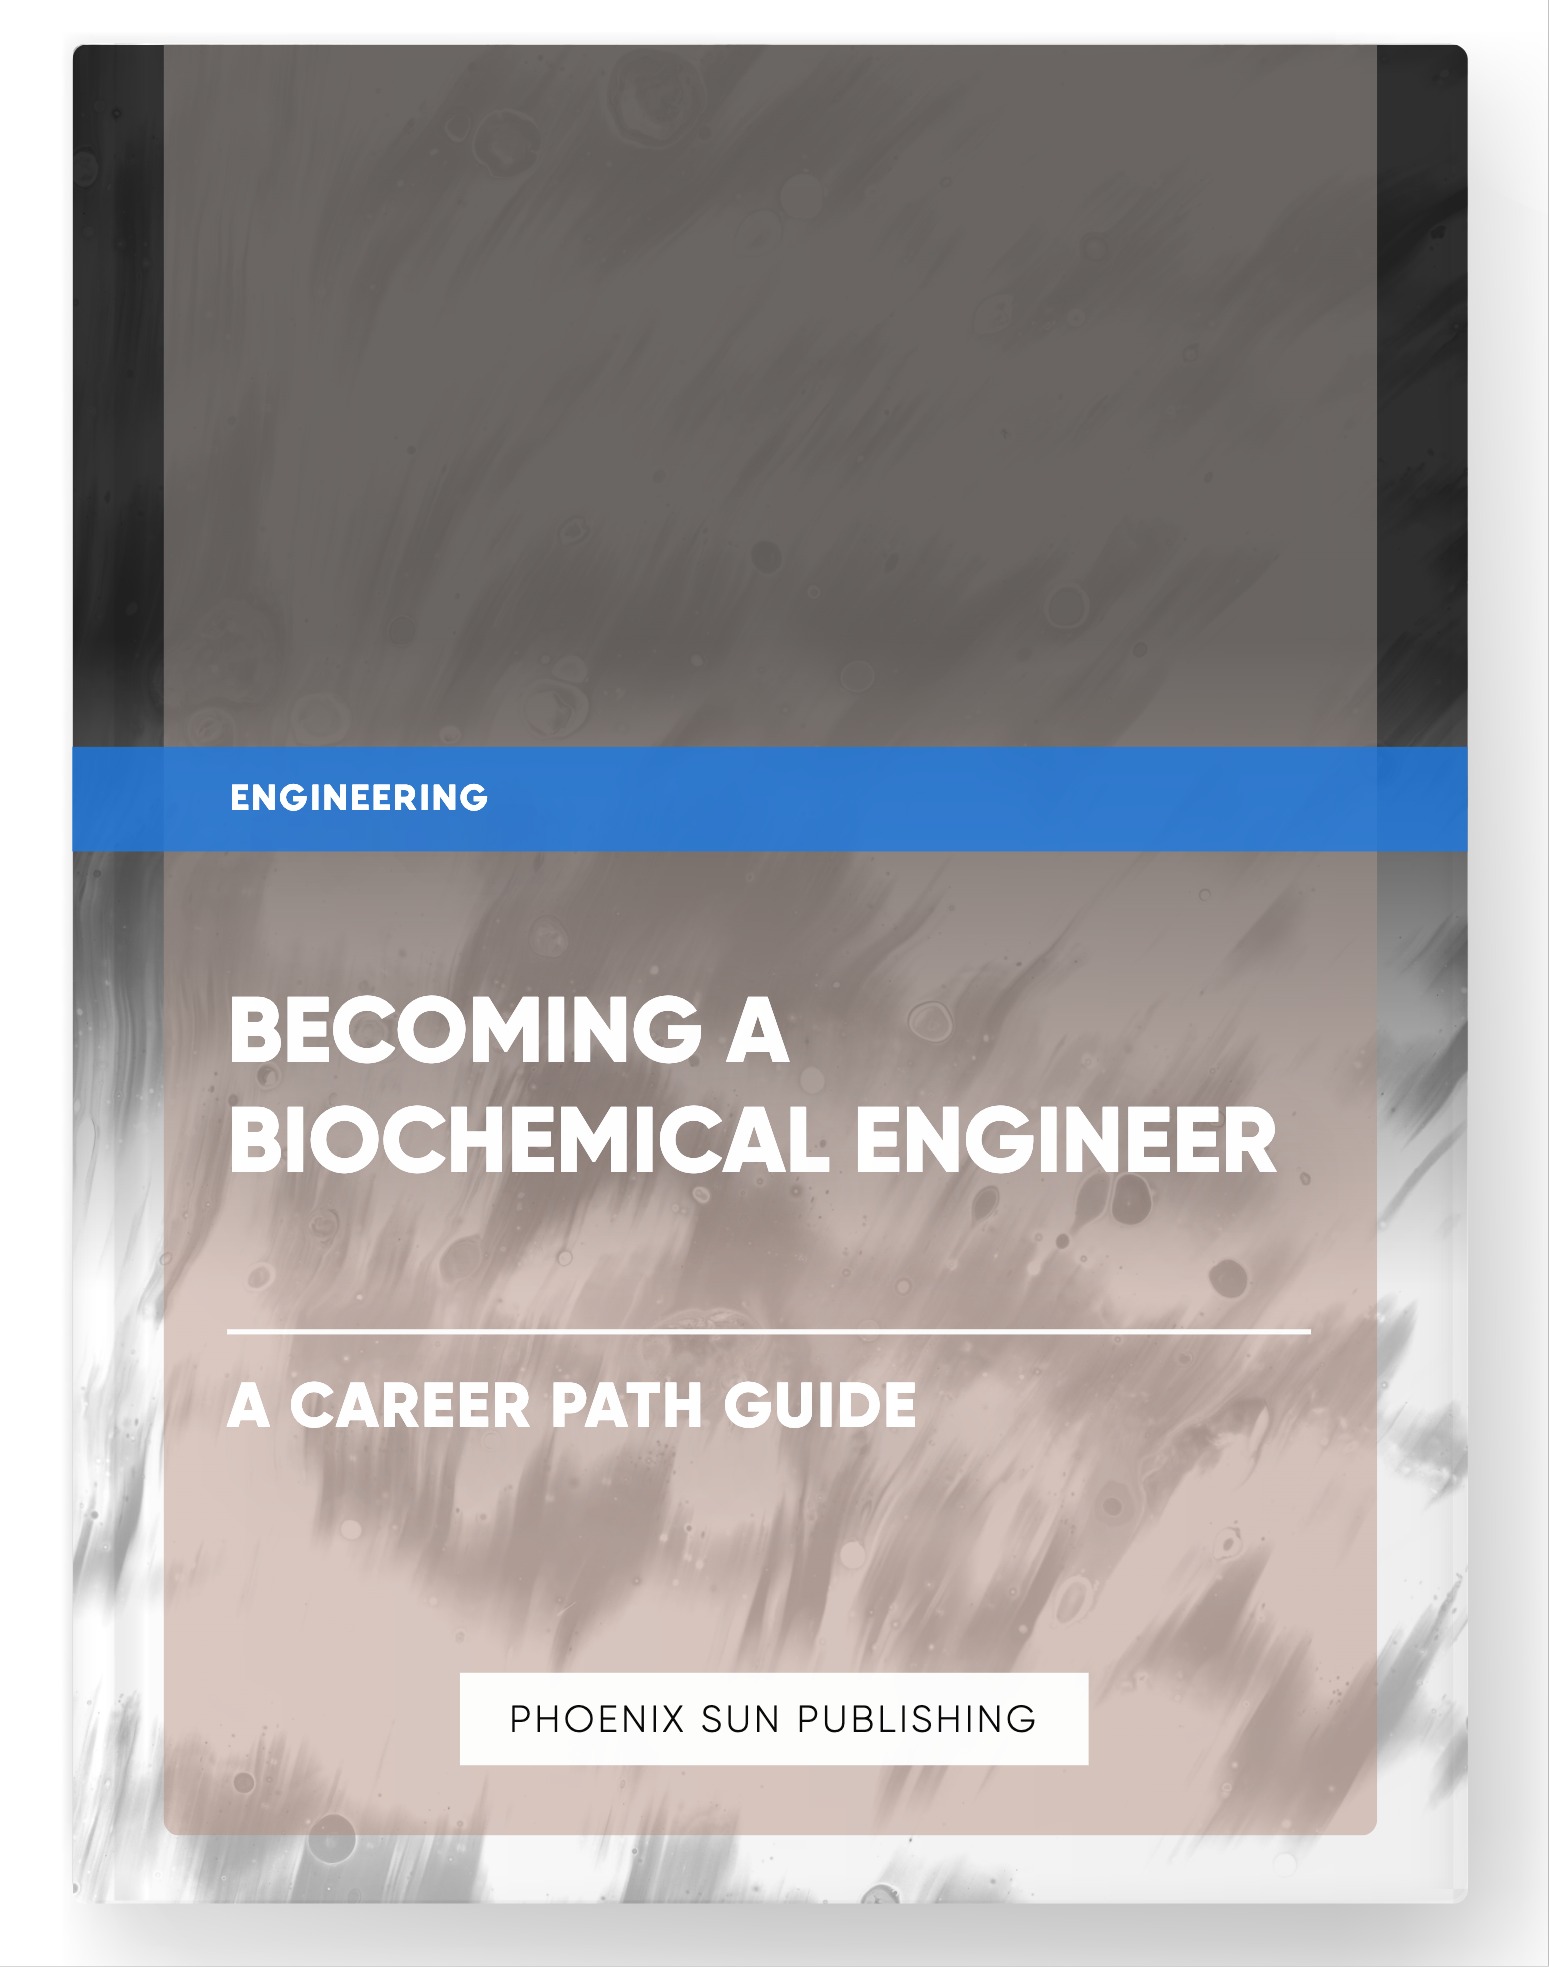 Becoming a Biochemical Engineer – A Career Path Guide